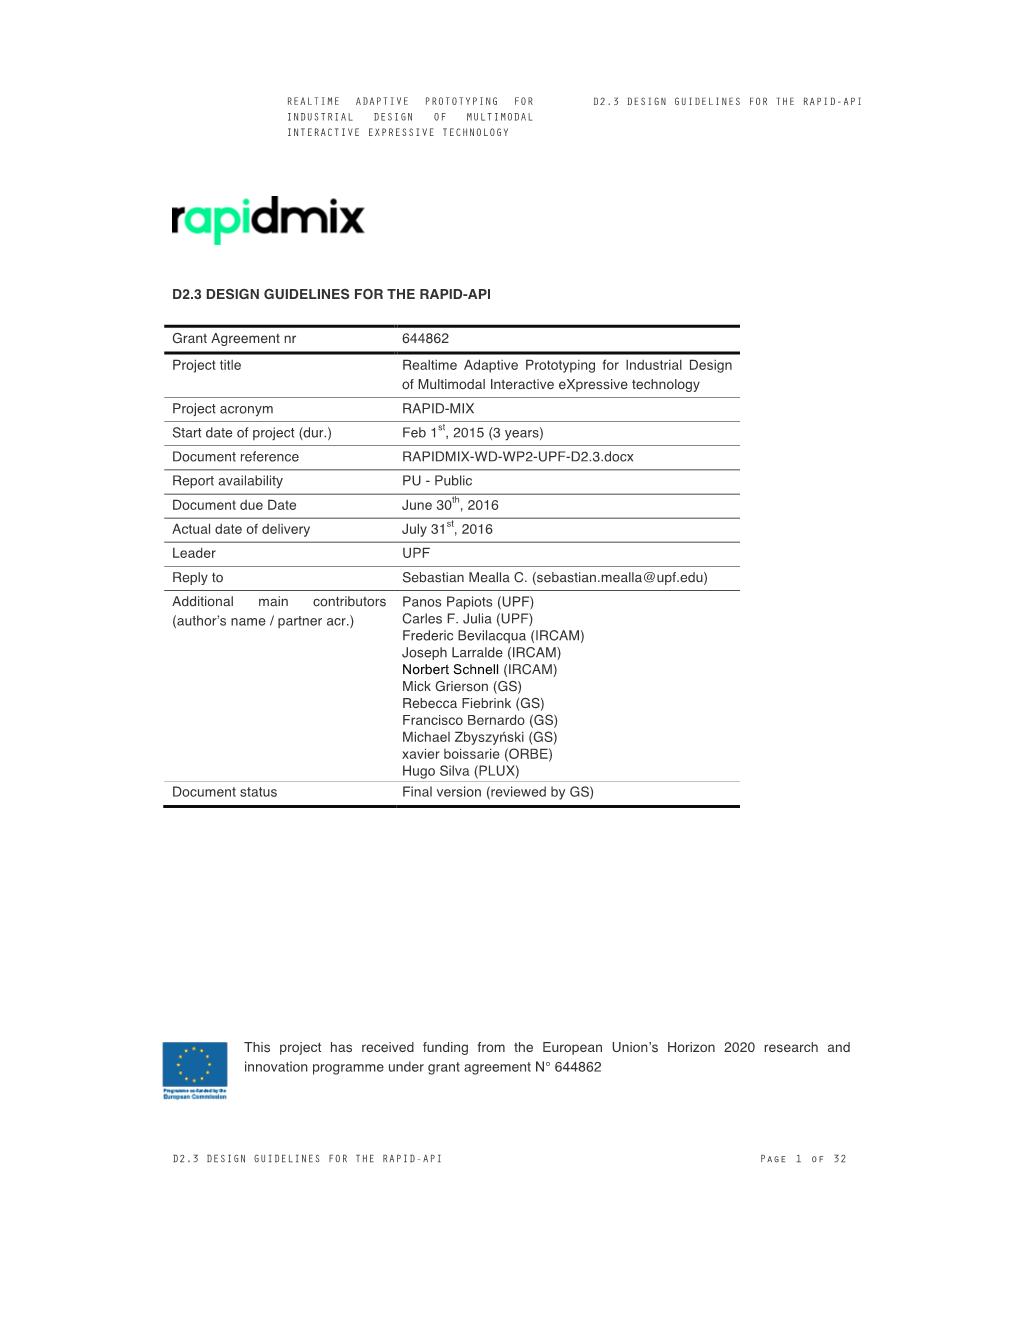 D2.3 Design Guidelines for the Rapid-Api Industrial Design of Multimodal Interactive Expressive Technology